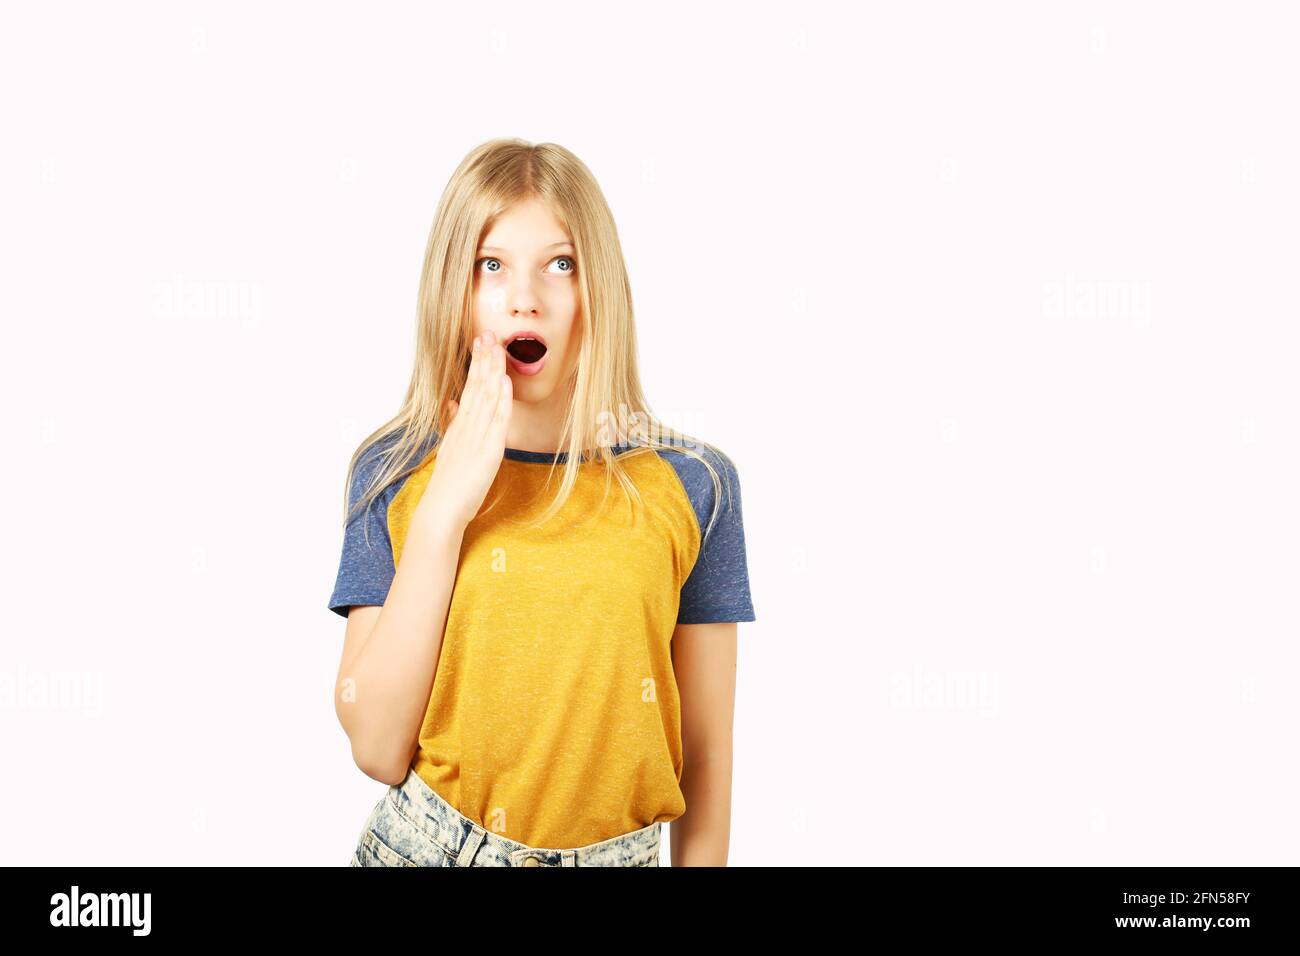 Surprised young teenage girl wearing yellow baseball t-shirt with blue sleeves, shocked facial expression, with mouth wide opened from being astonishe Stock Photo